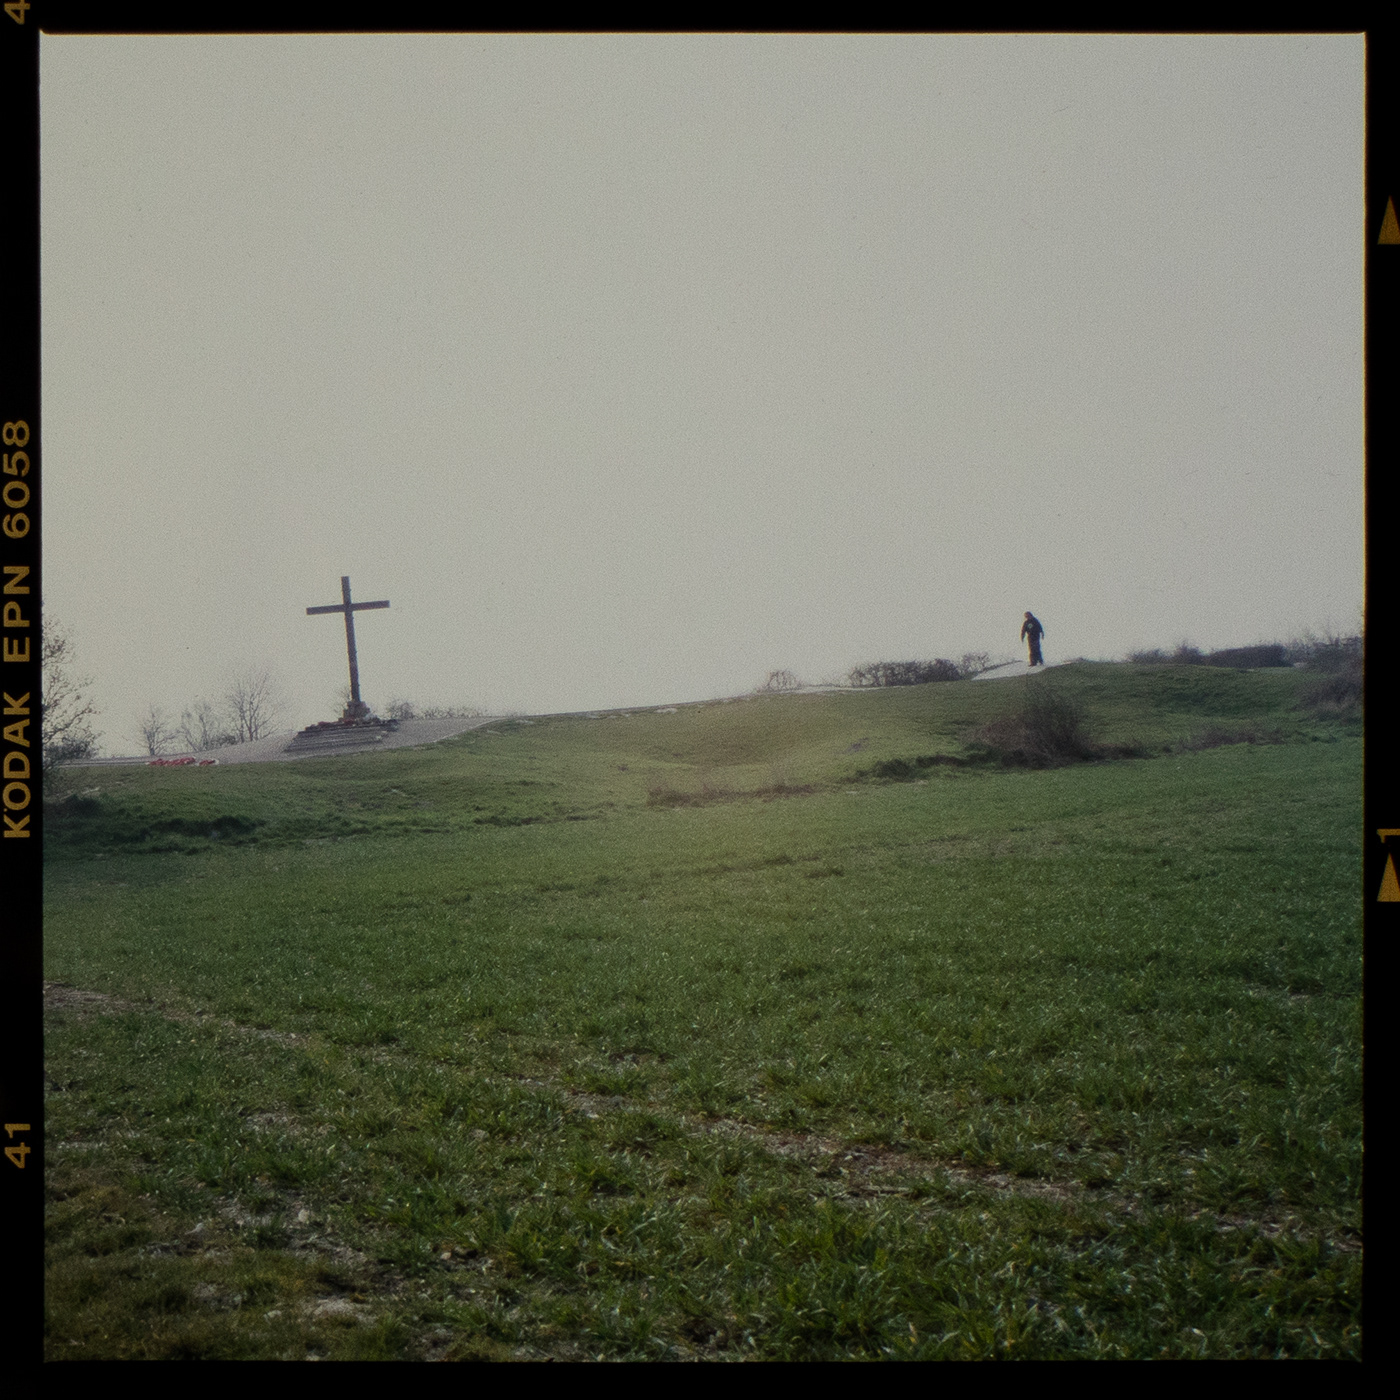 Image from Peter Bromley's 10 Year Photographic & Film Essay: The Somme Project: www.thesomme.net